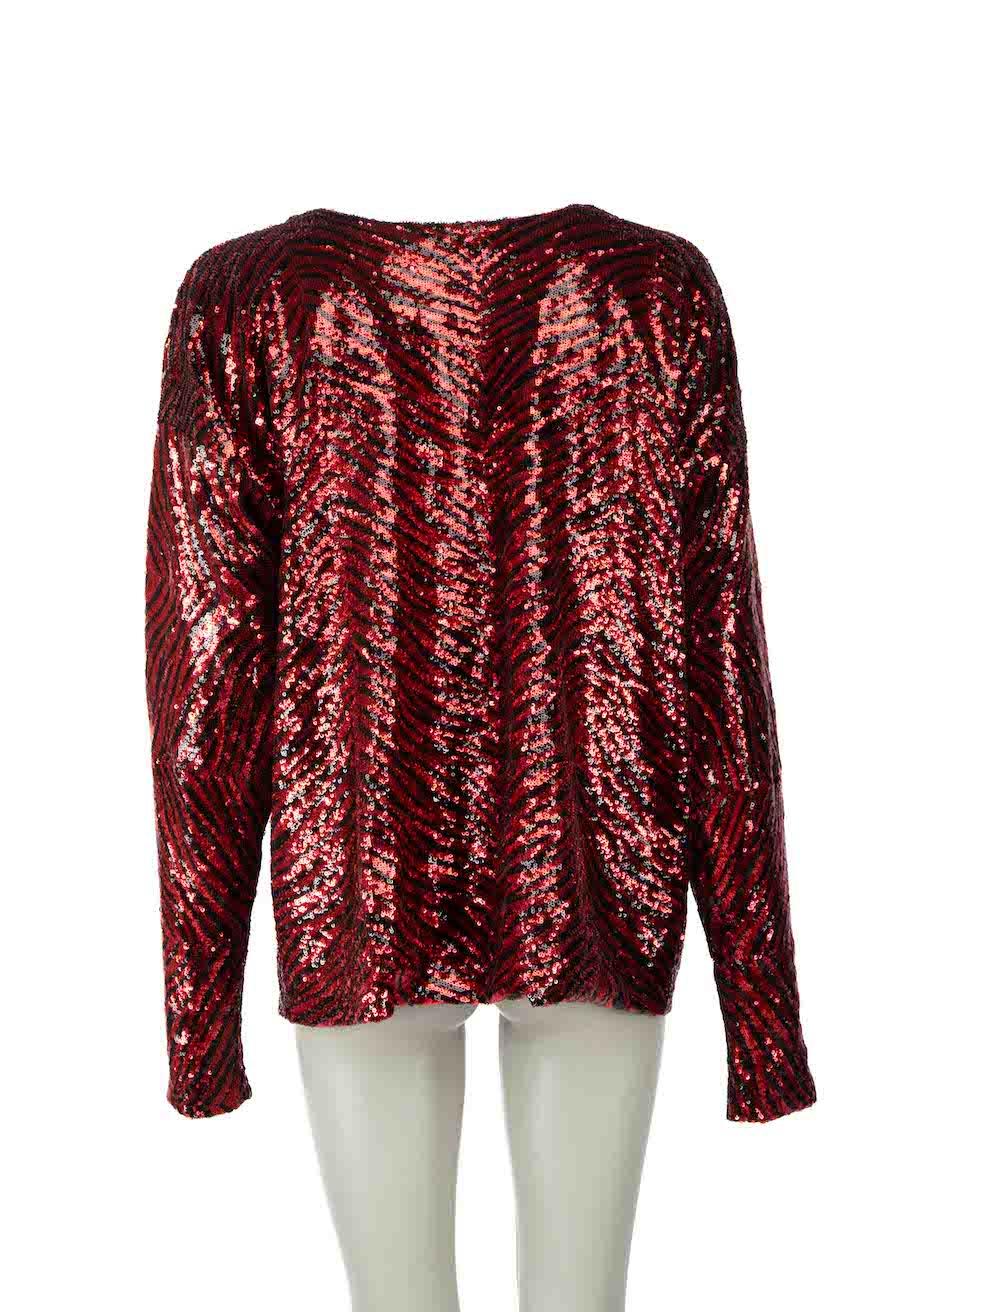 Alexandre Vauthier Red Sequin Tiger Print Top Size L In Excellent Condition For Sale In London, GB